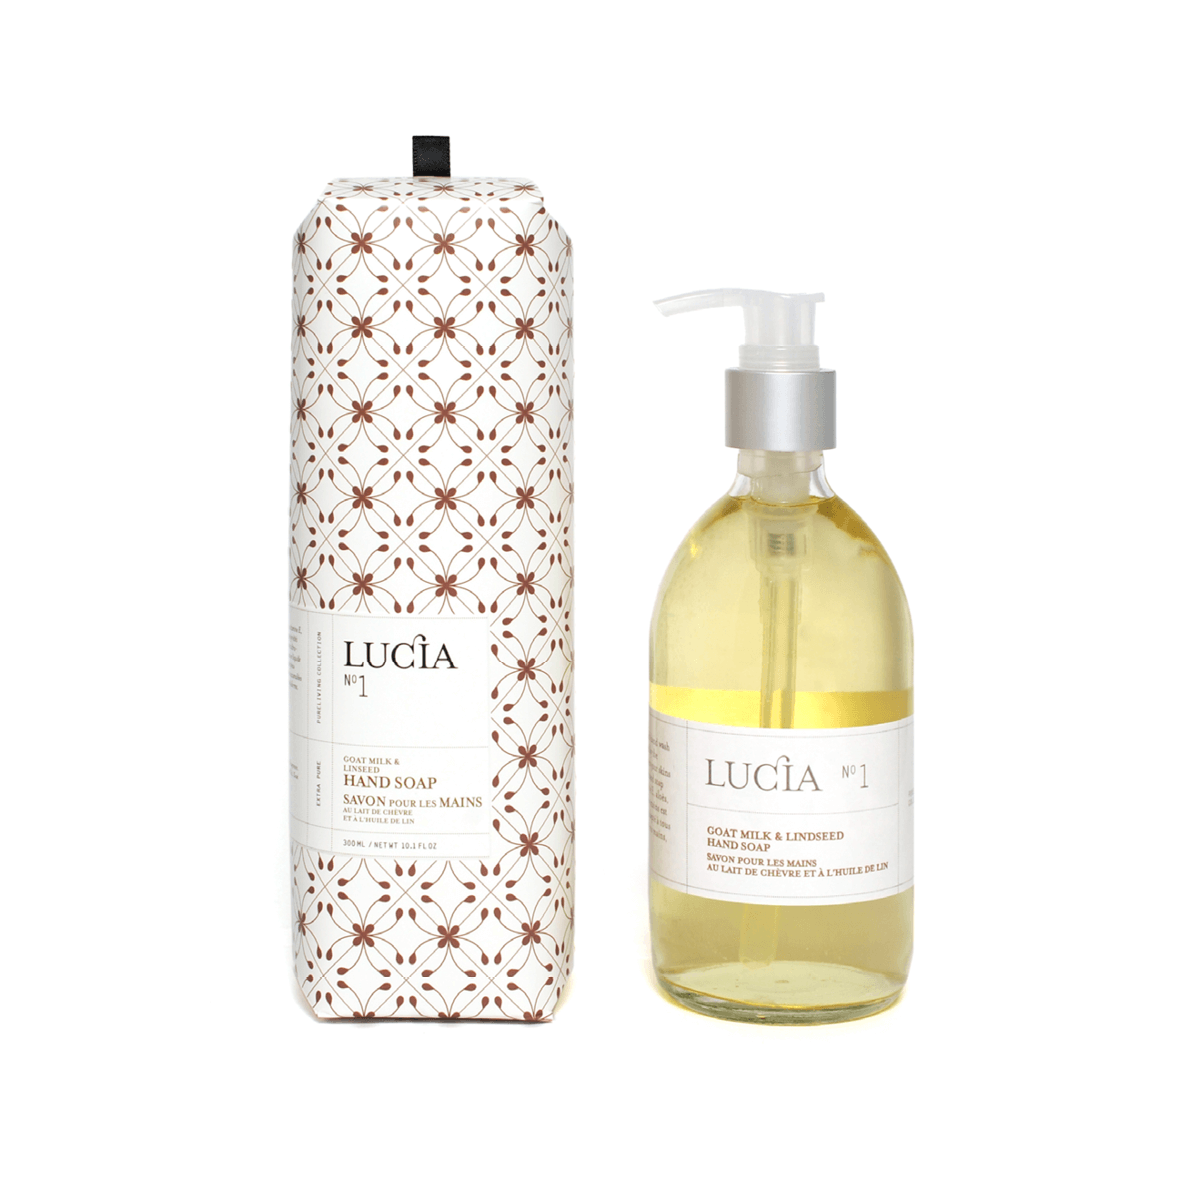 Lucia #1-Linseed & Goat Milk Hand Soap